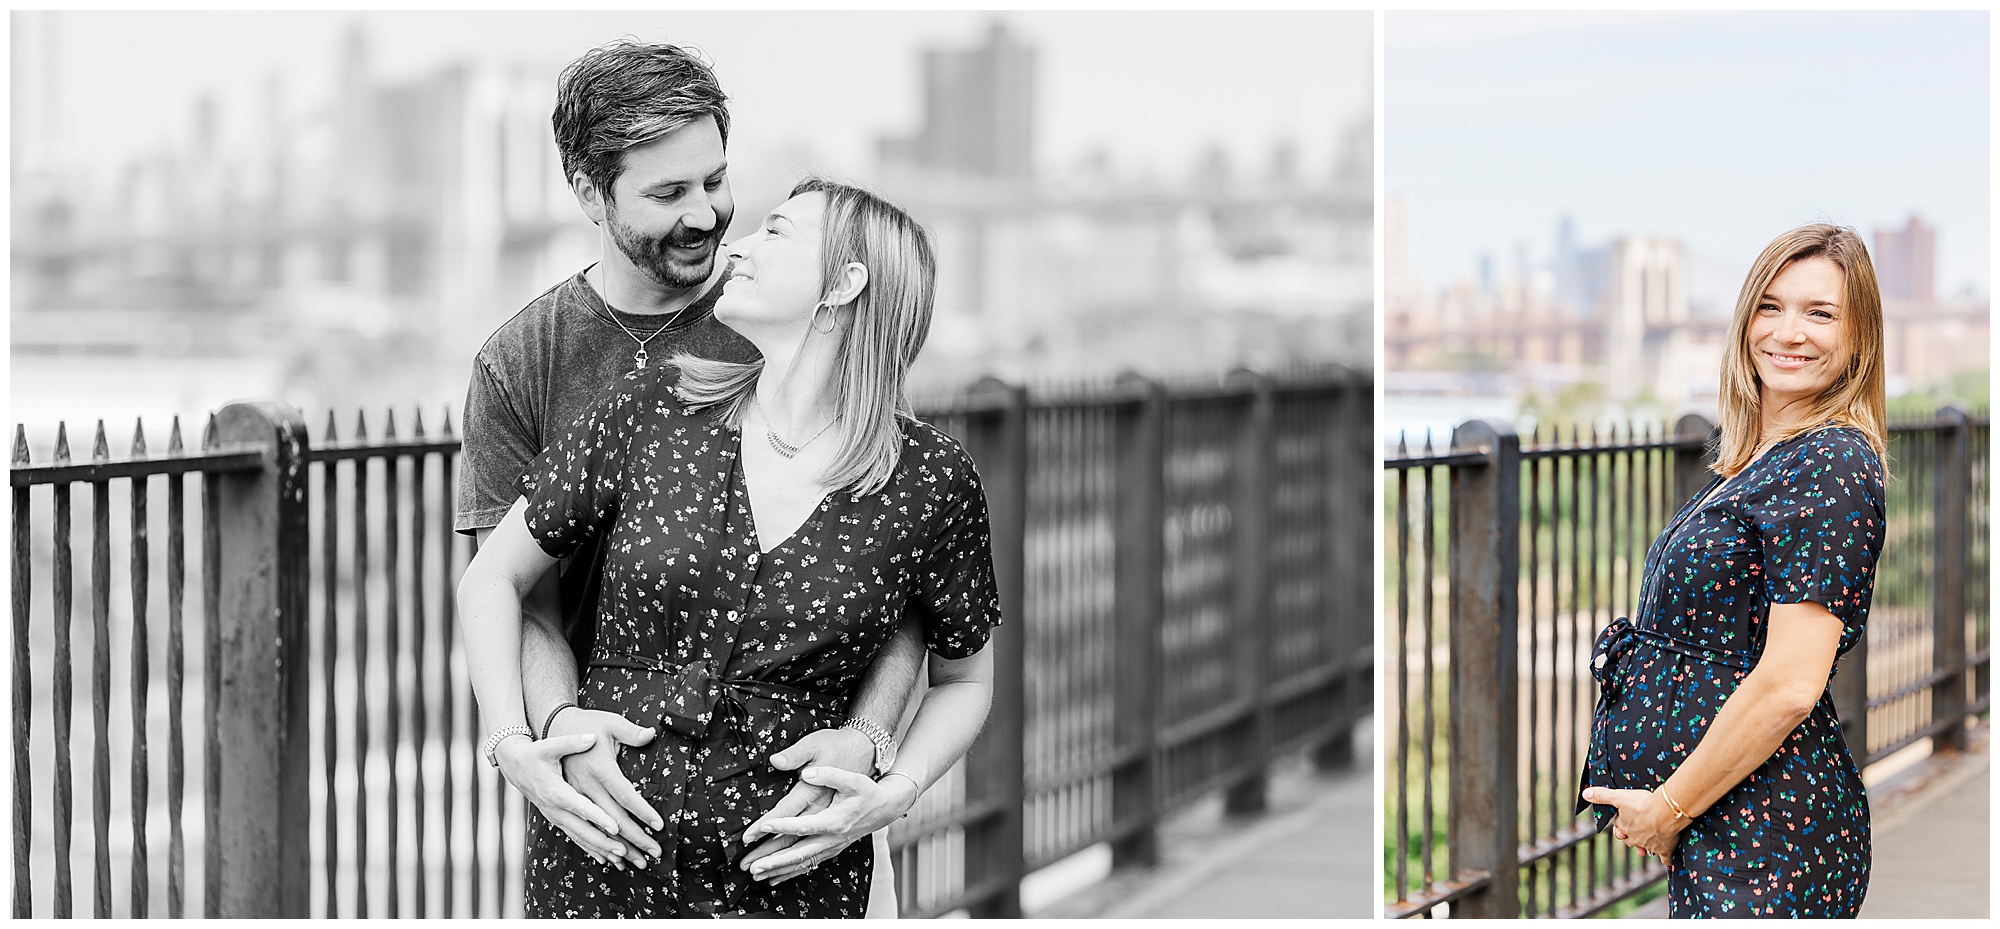 Cute family photo shoot in Brooklyn Heights